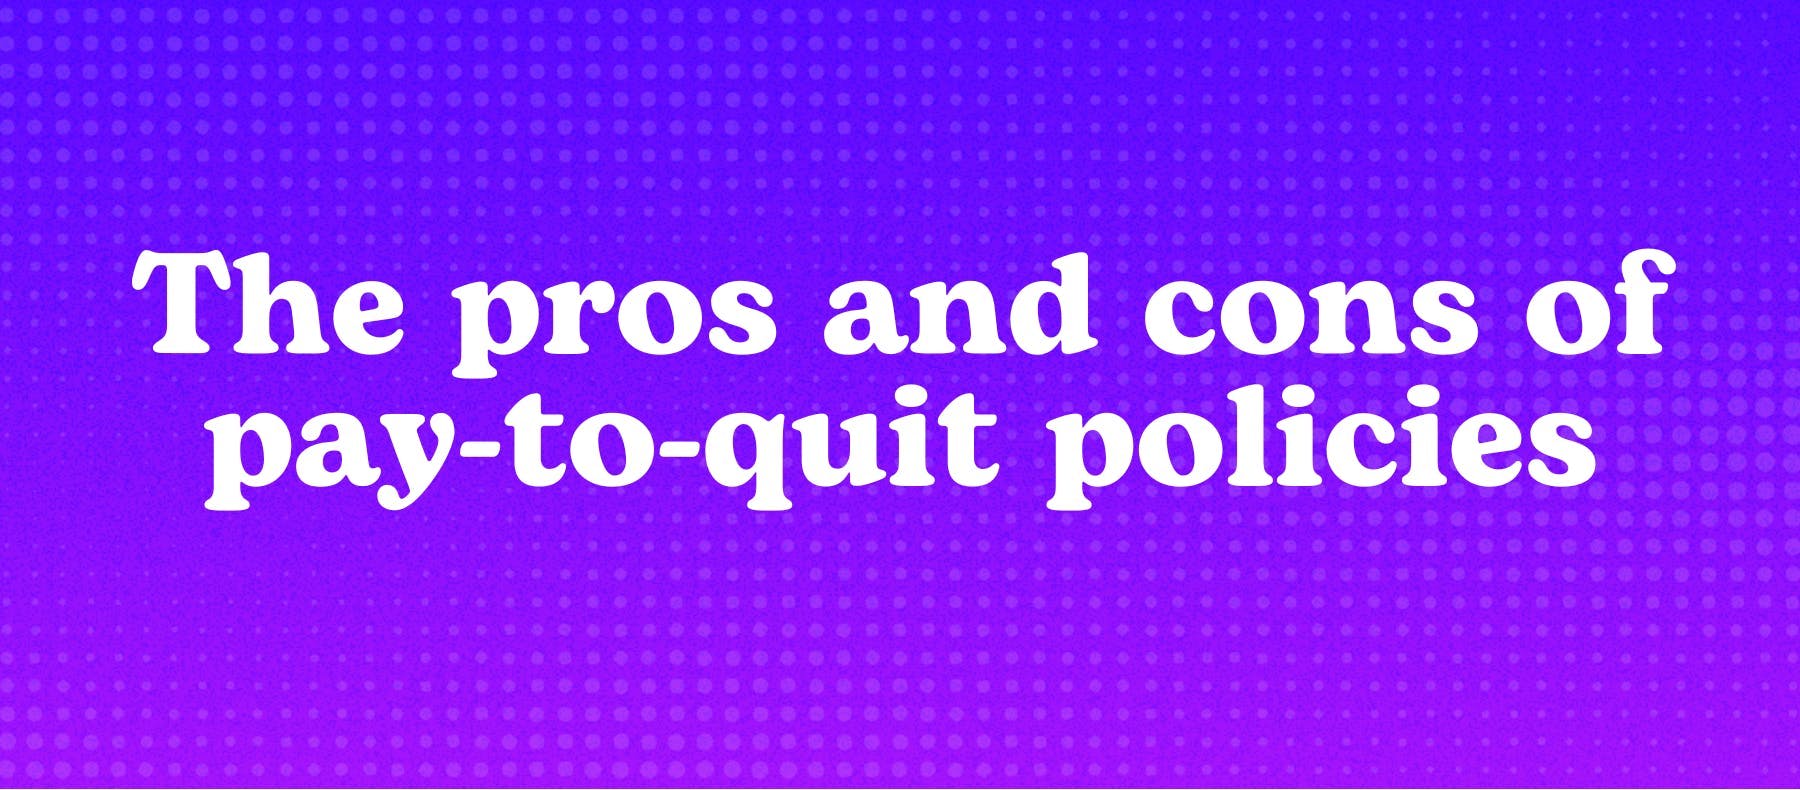 The pros and cons of pay-to-quit policies